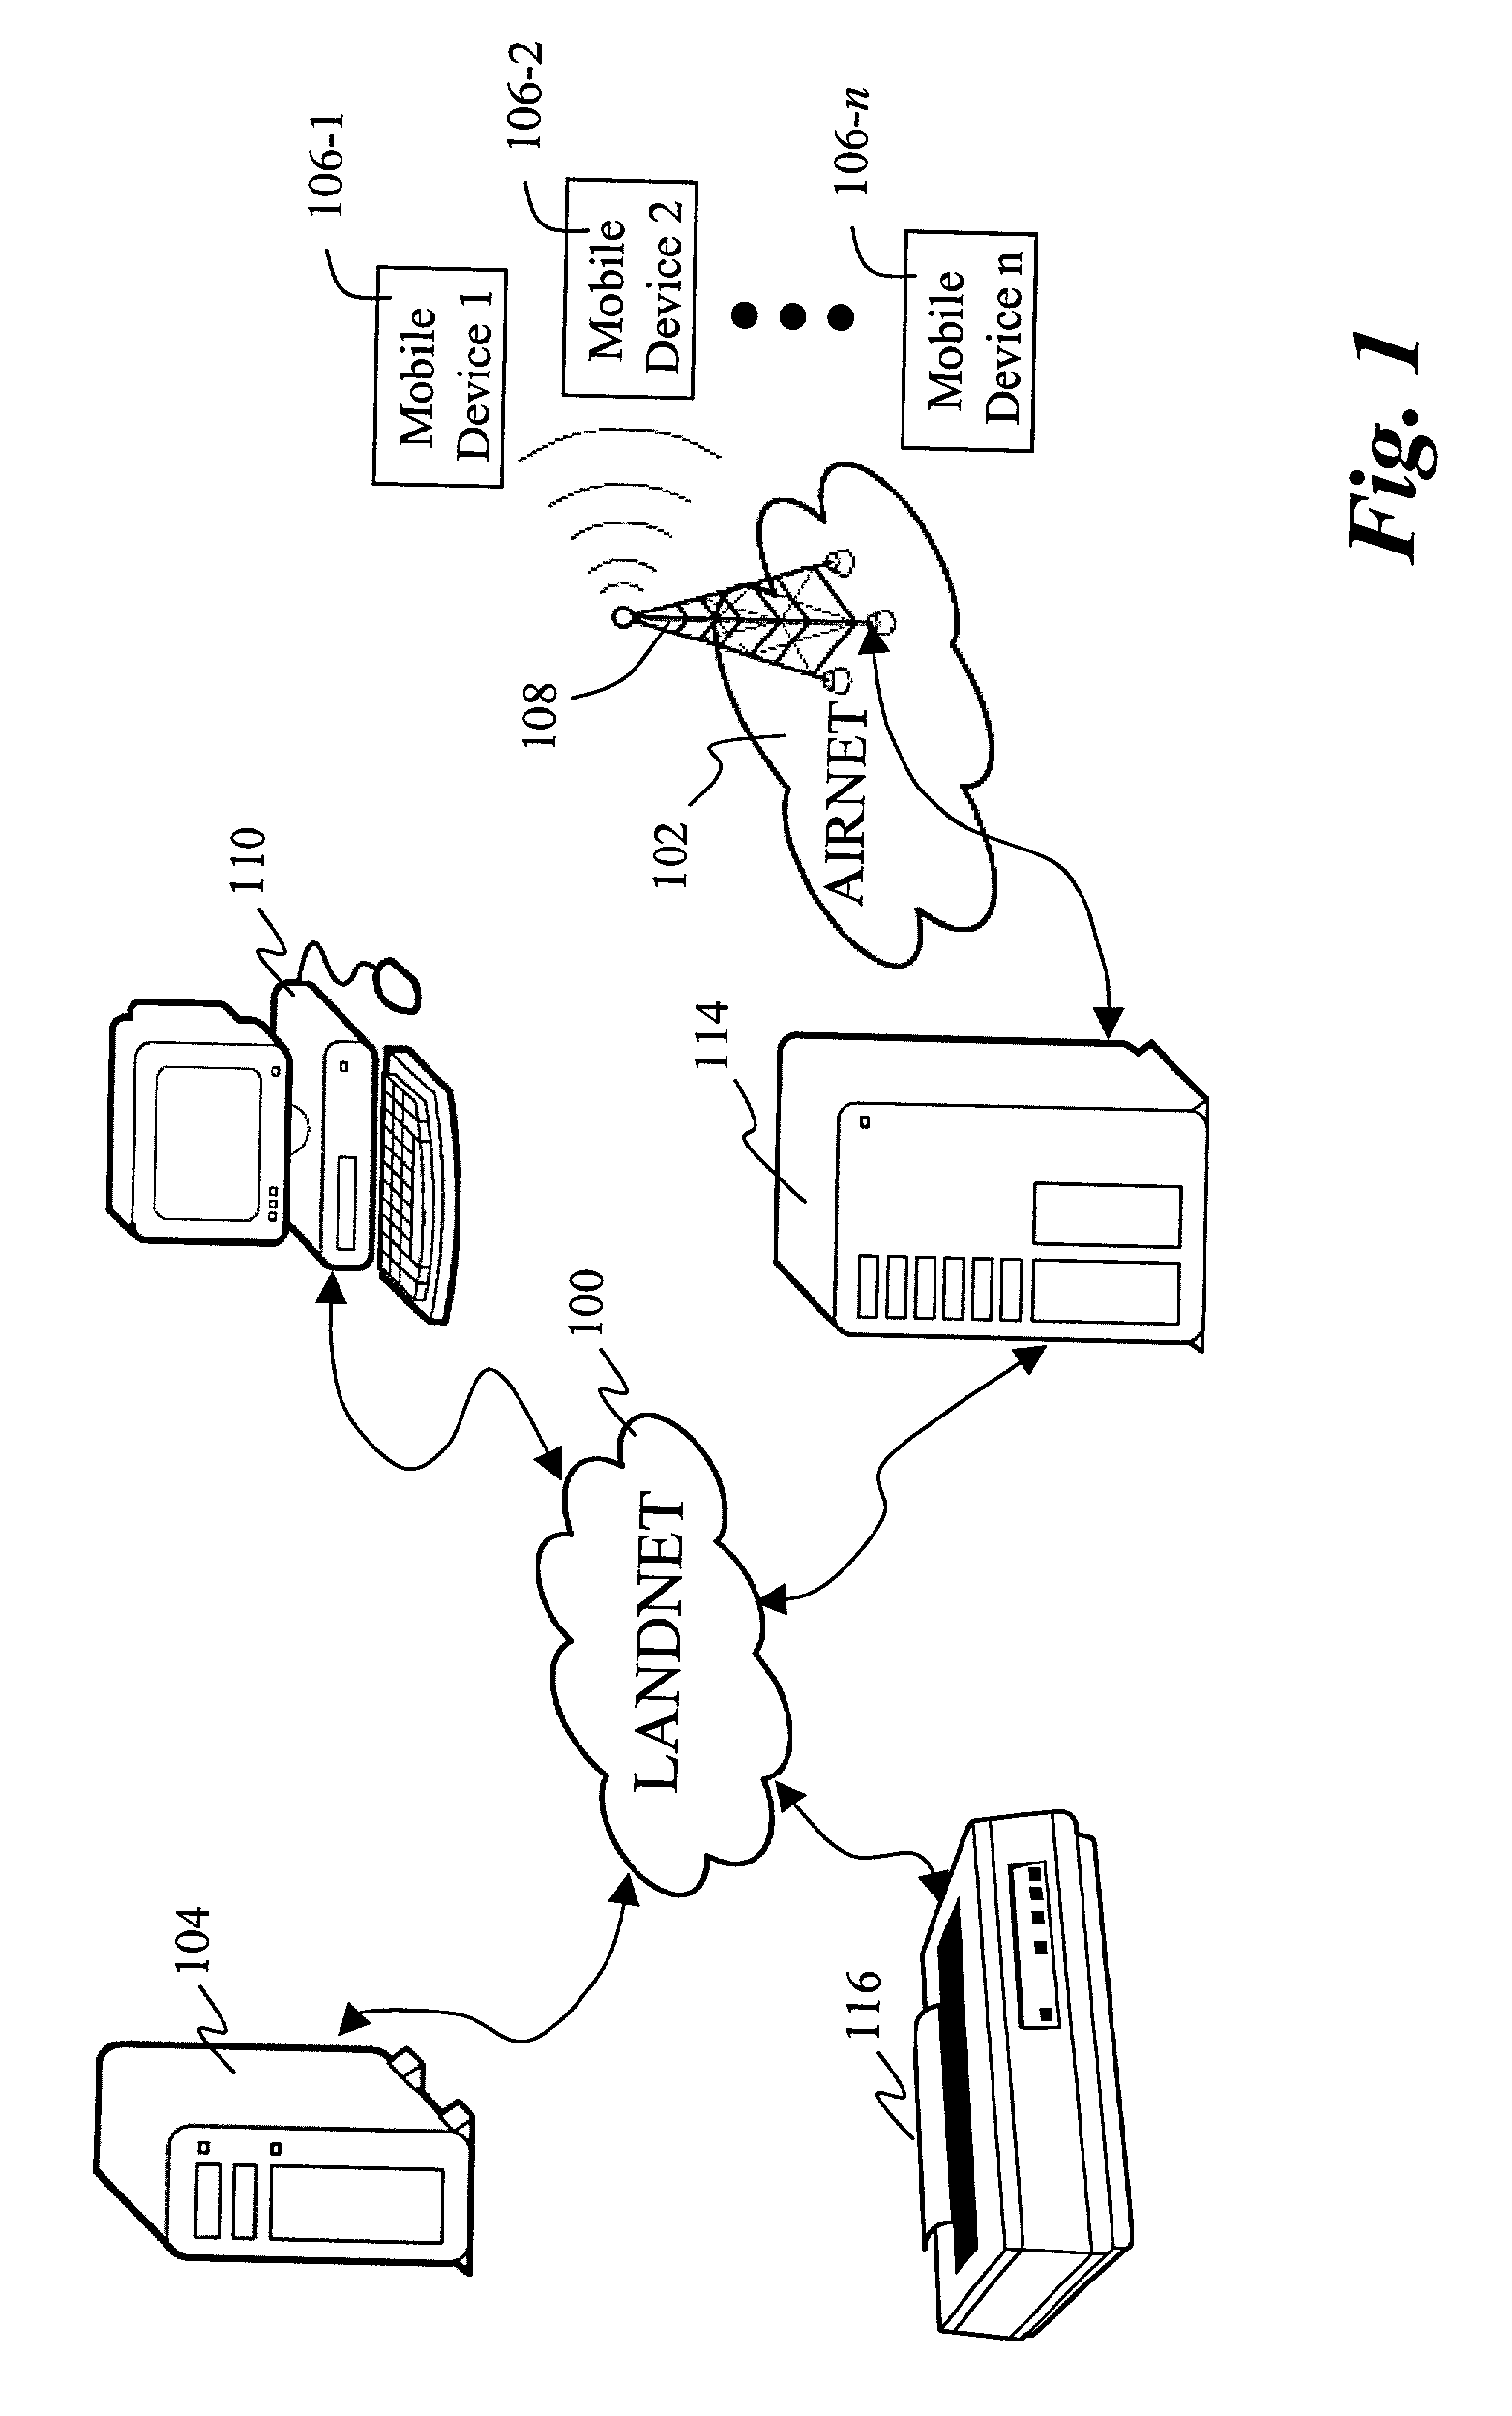 Mobile device equipped with digital image sensor